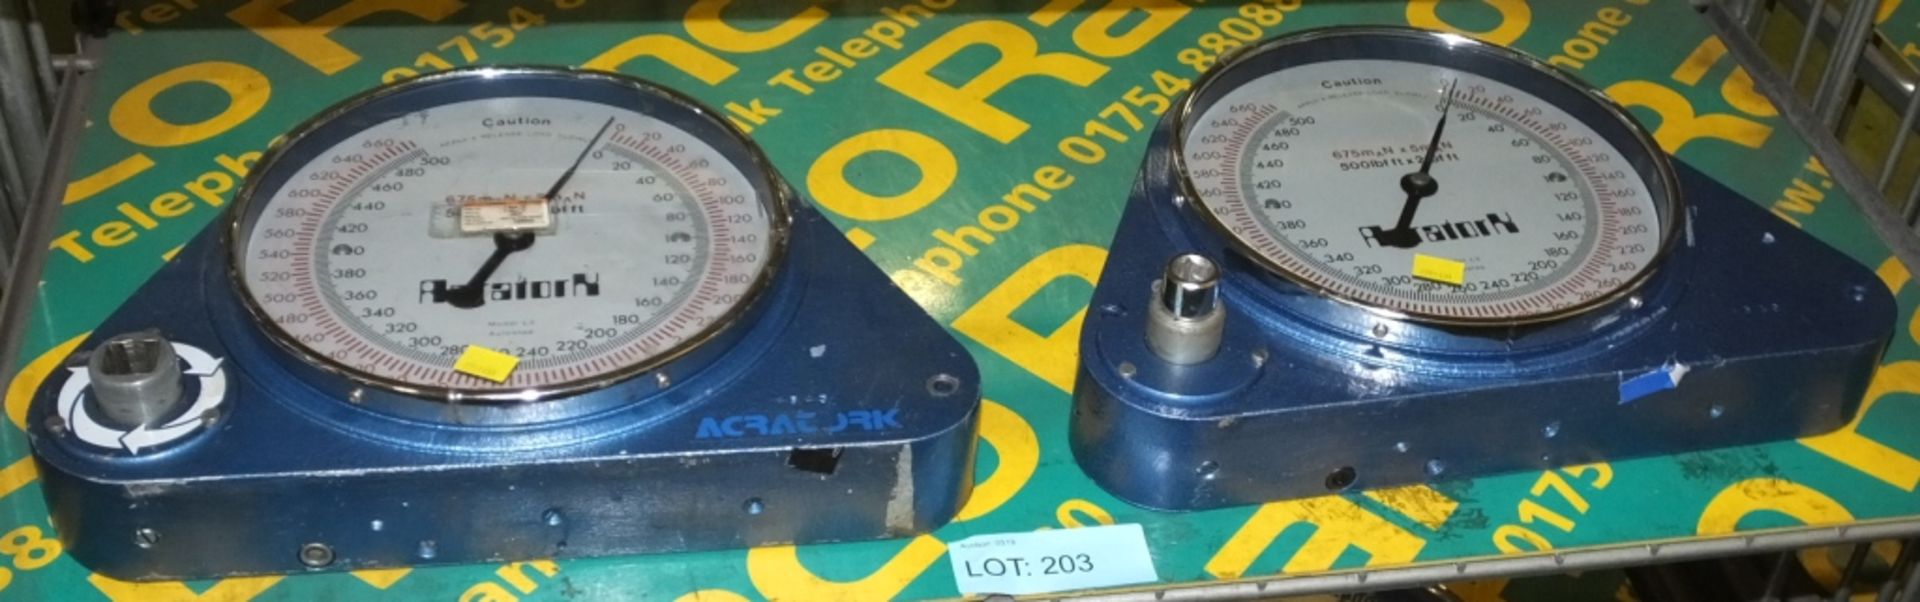 2x Acratork L3 - Torque wrench testers